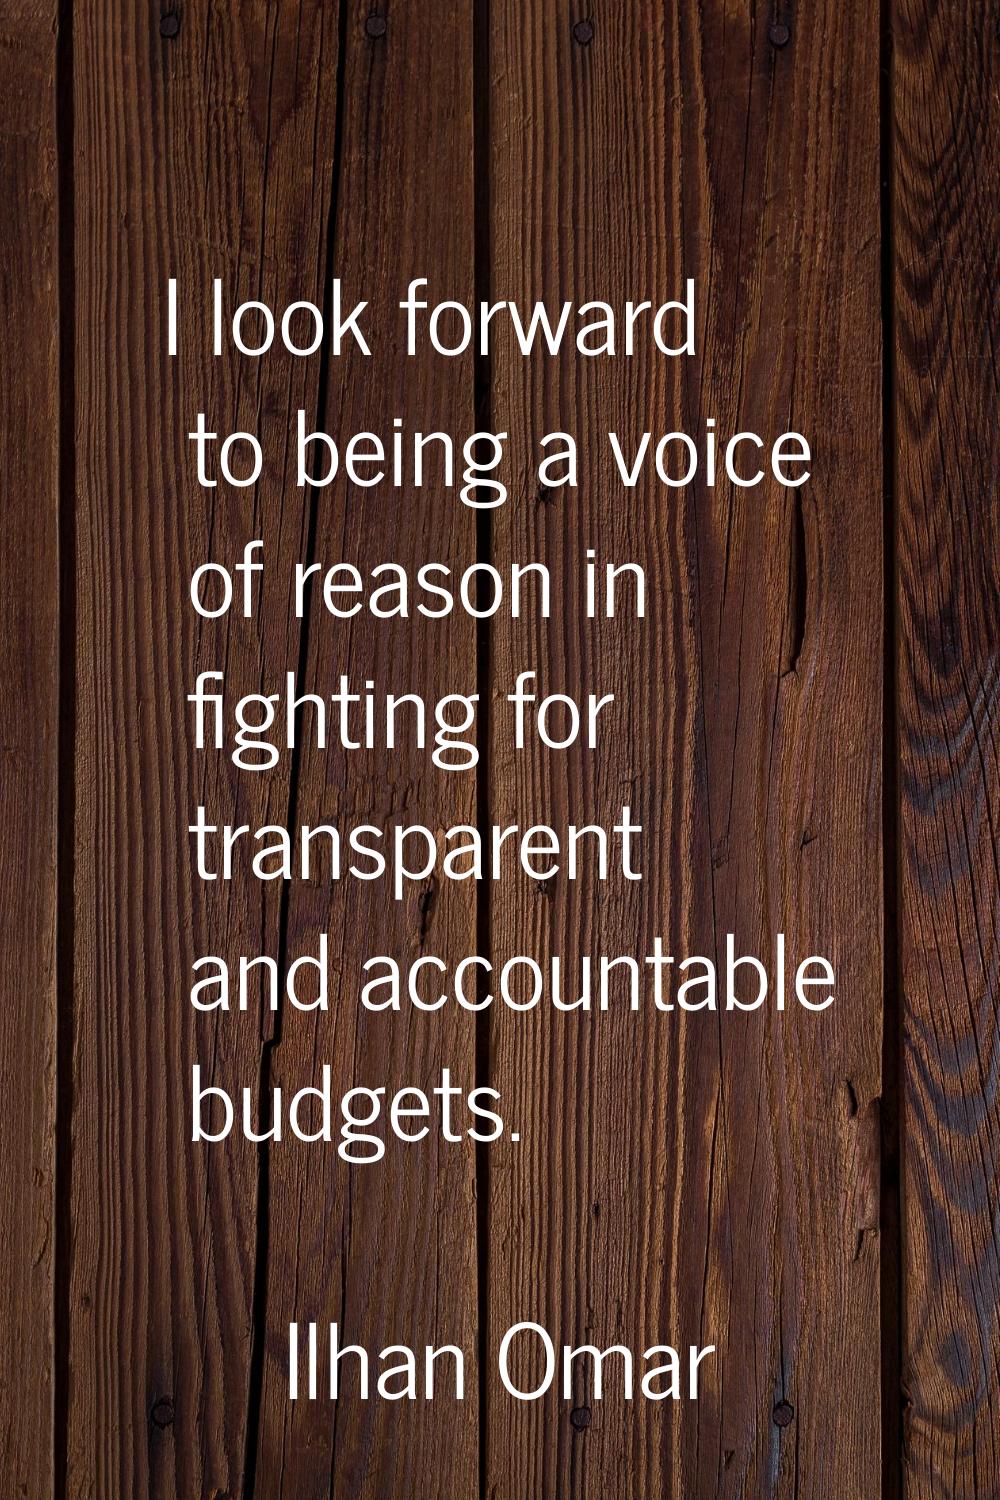 I look forward to being a voice of reason in fighting for transparent and accountable budgets.